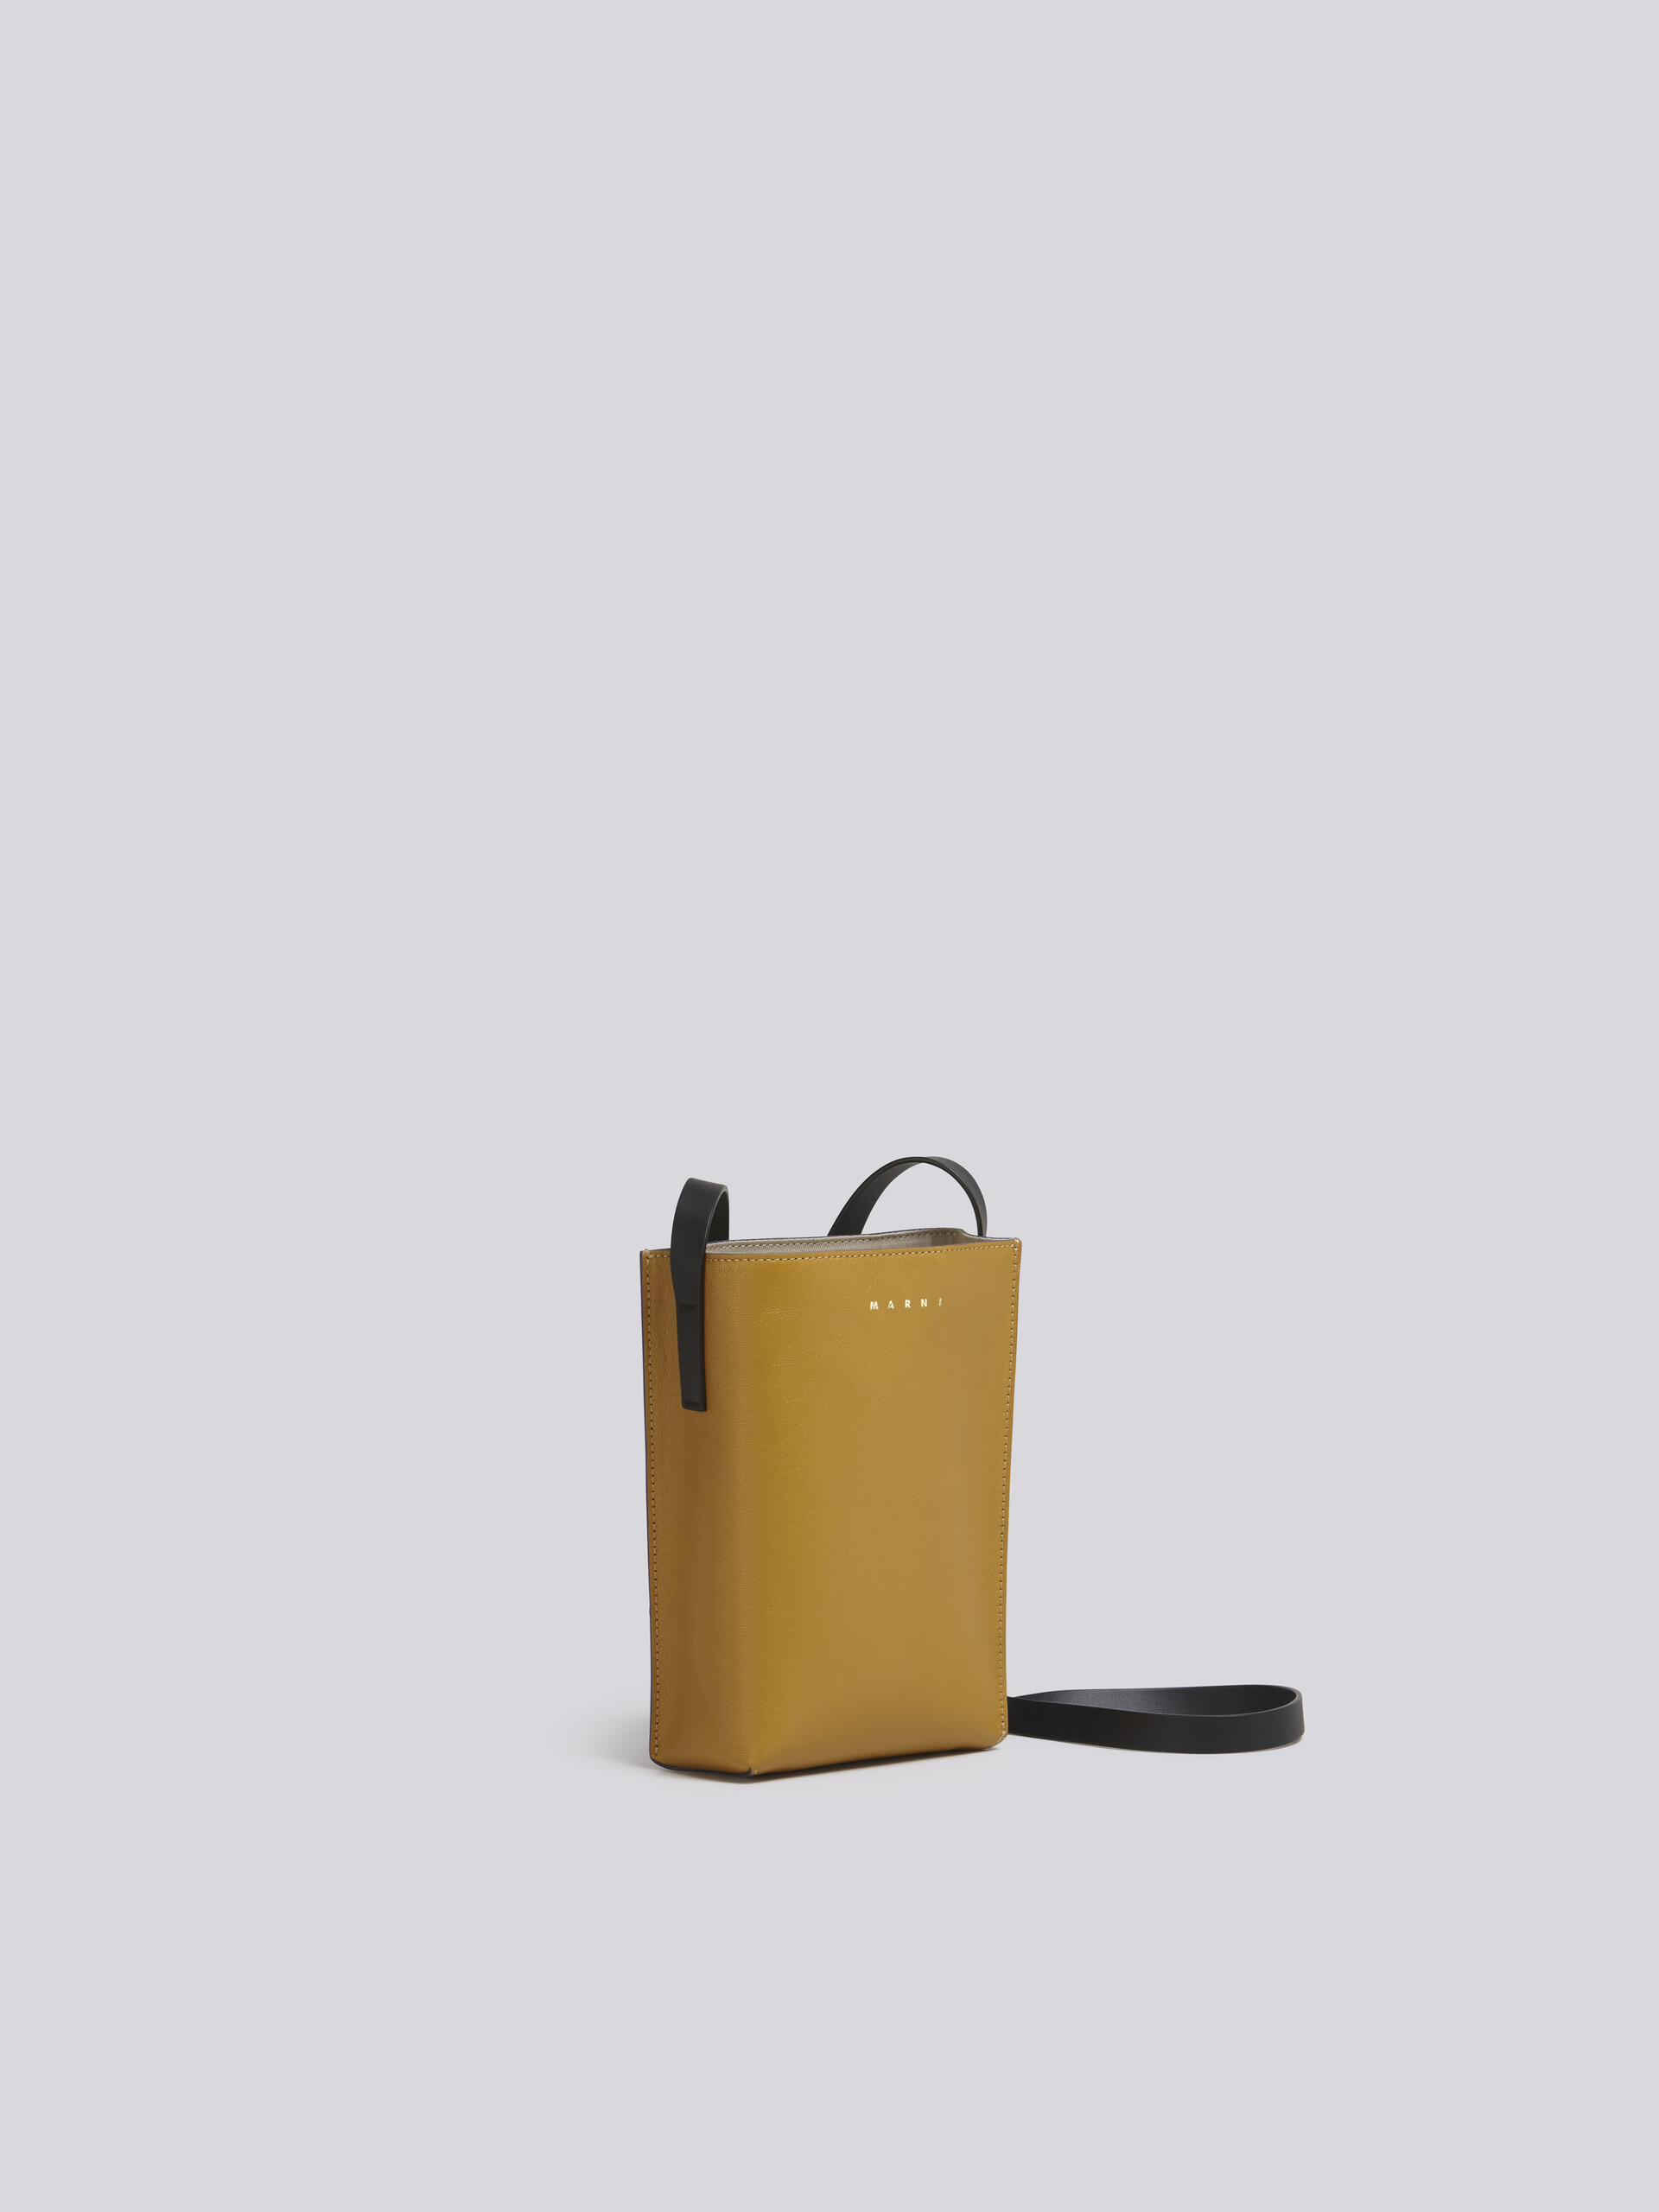 MUSEO SOFT nano bag in yellow and green leather - Shoulder Bags - Image 5